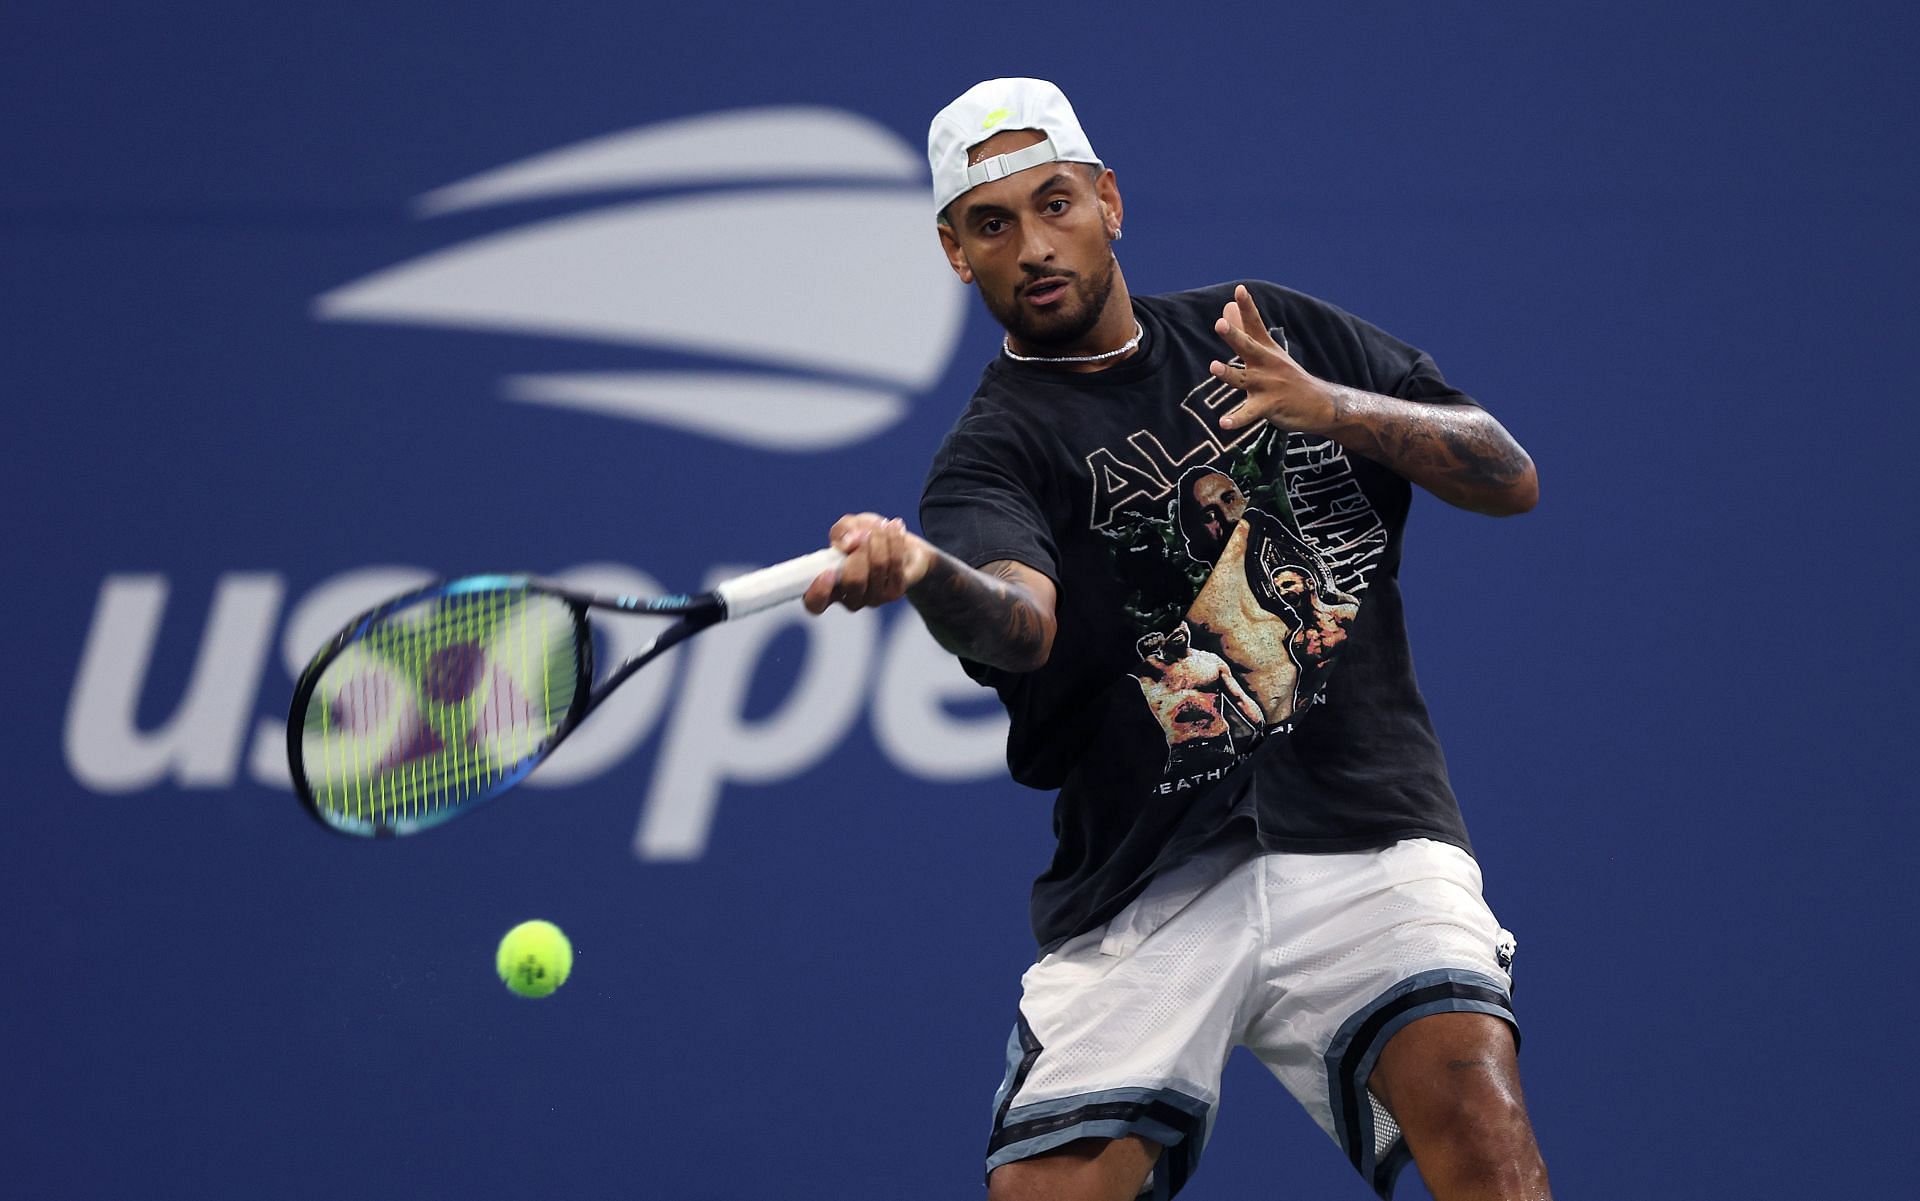 Nick Kyrgios will look to reach the second week at the US Open for the first time